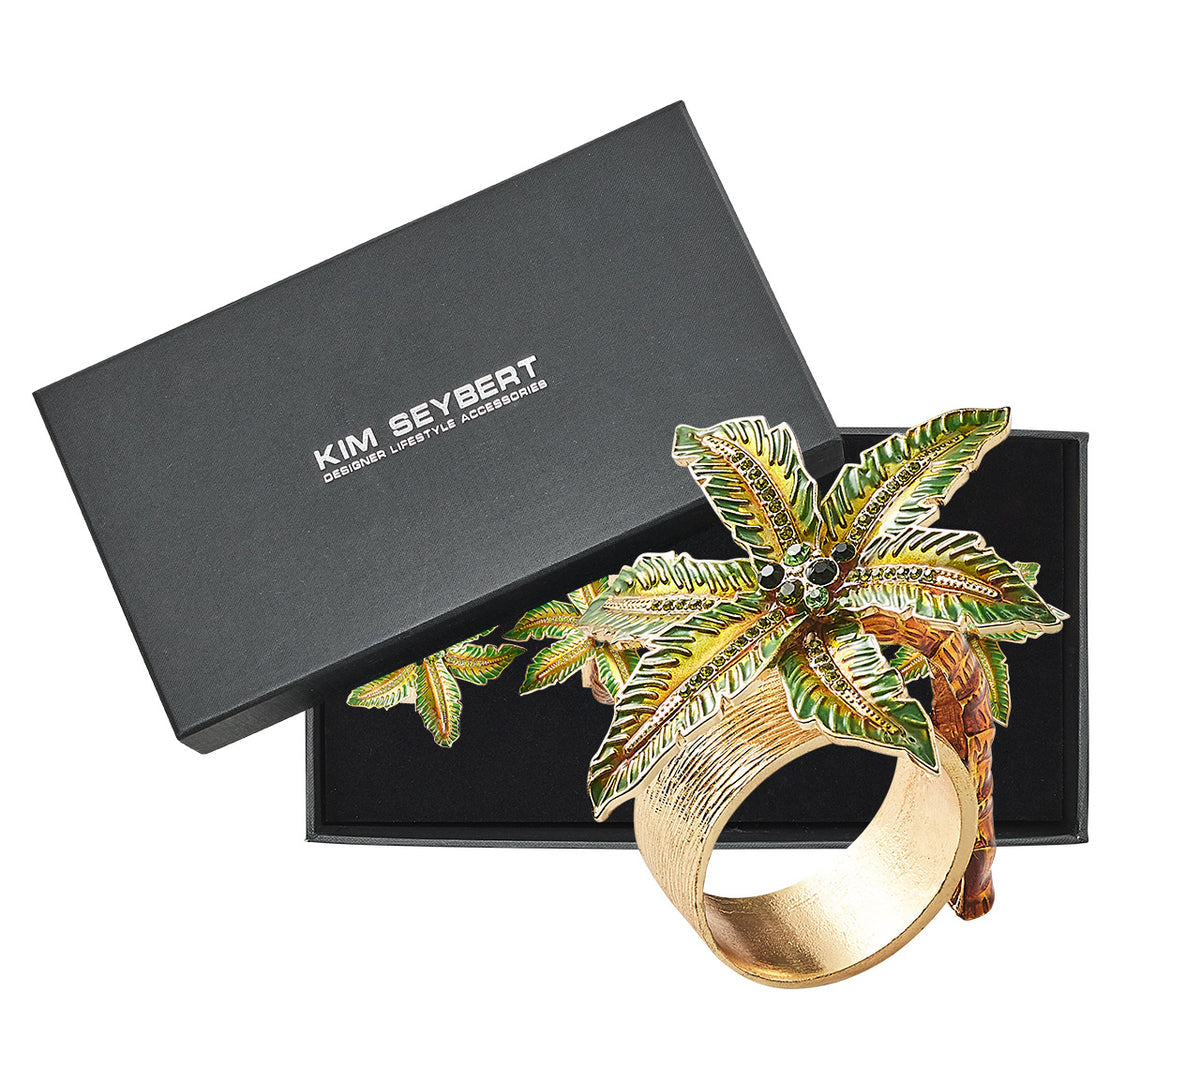 Palm Coast Napkin Ring in Green & Gold, Set of 4 in a Gift Box by Kim Seybert